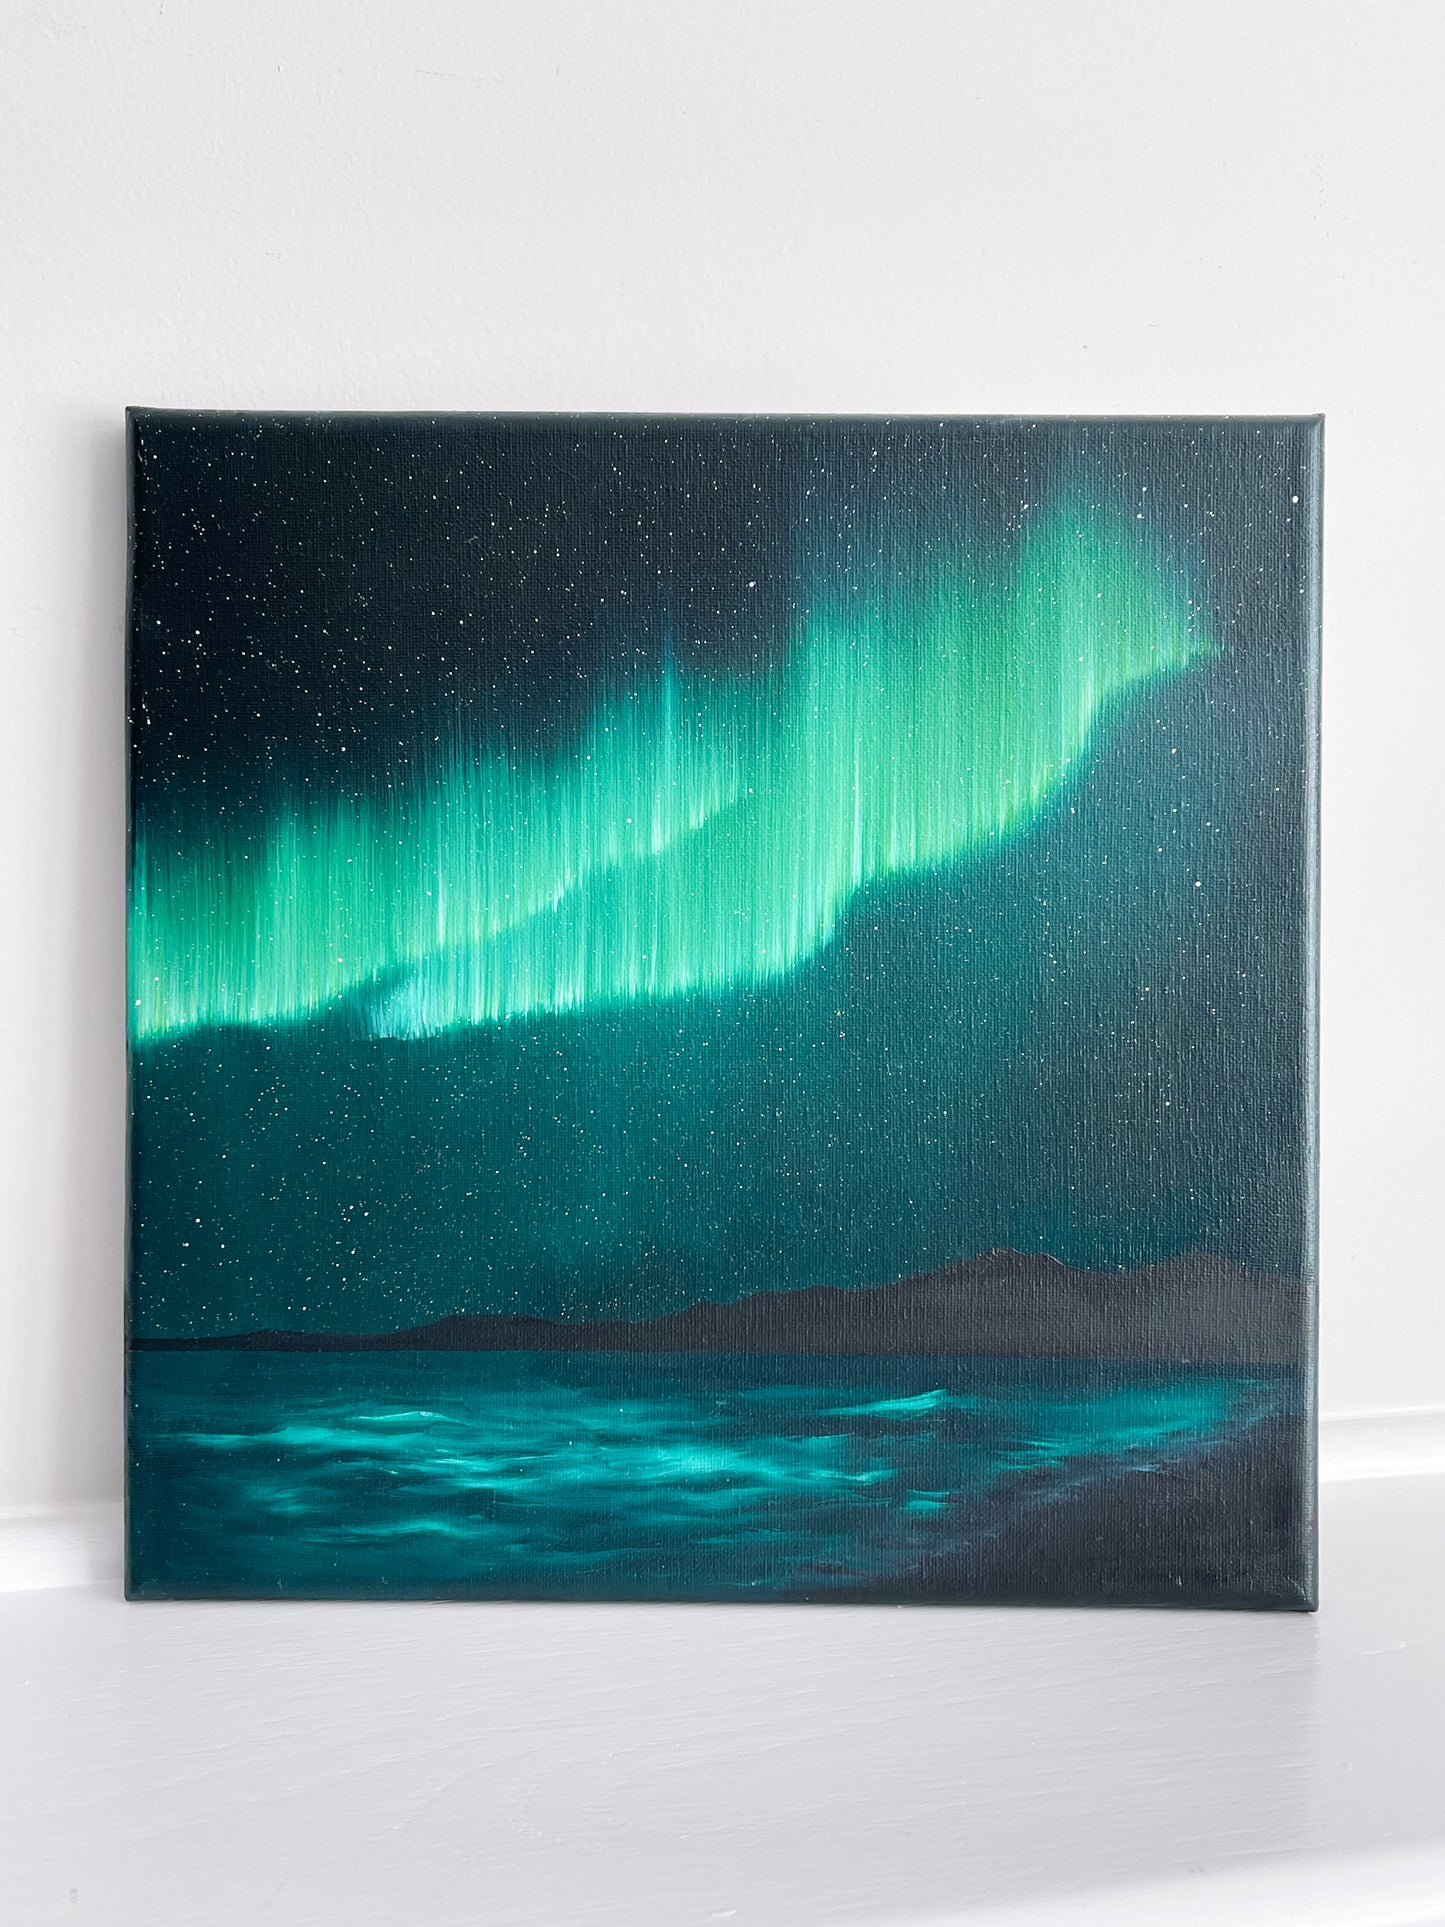 Emerald Reflection - Reserved for Auction Winner Ellyn Cole